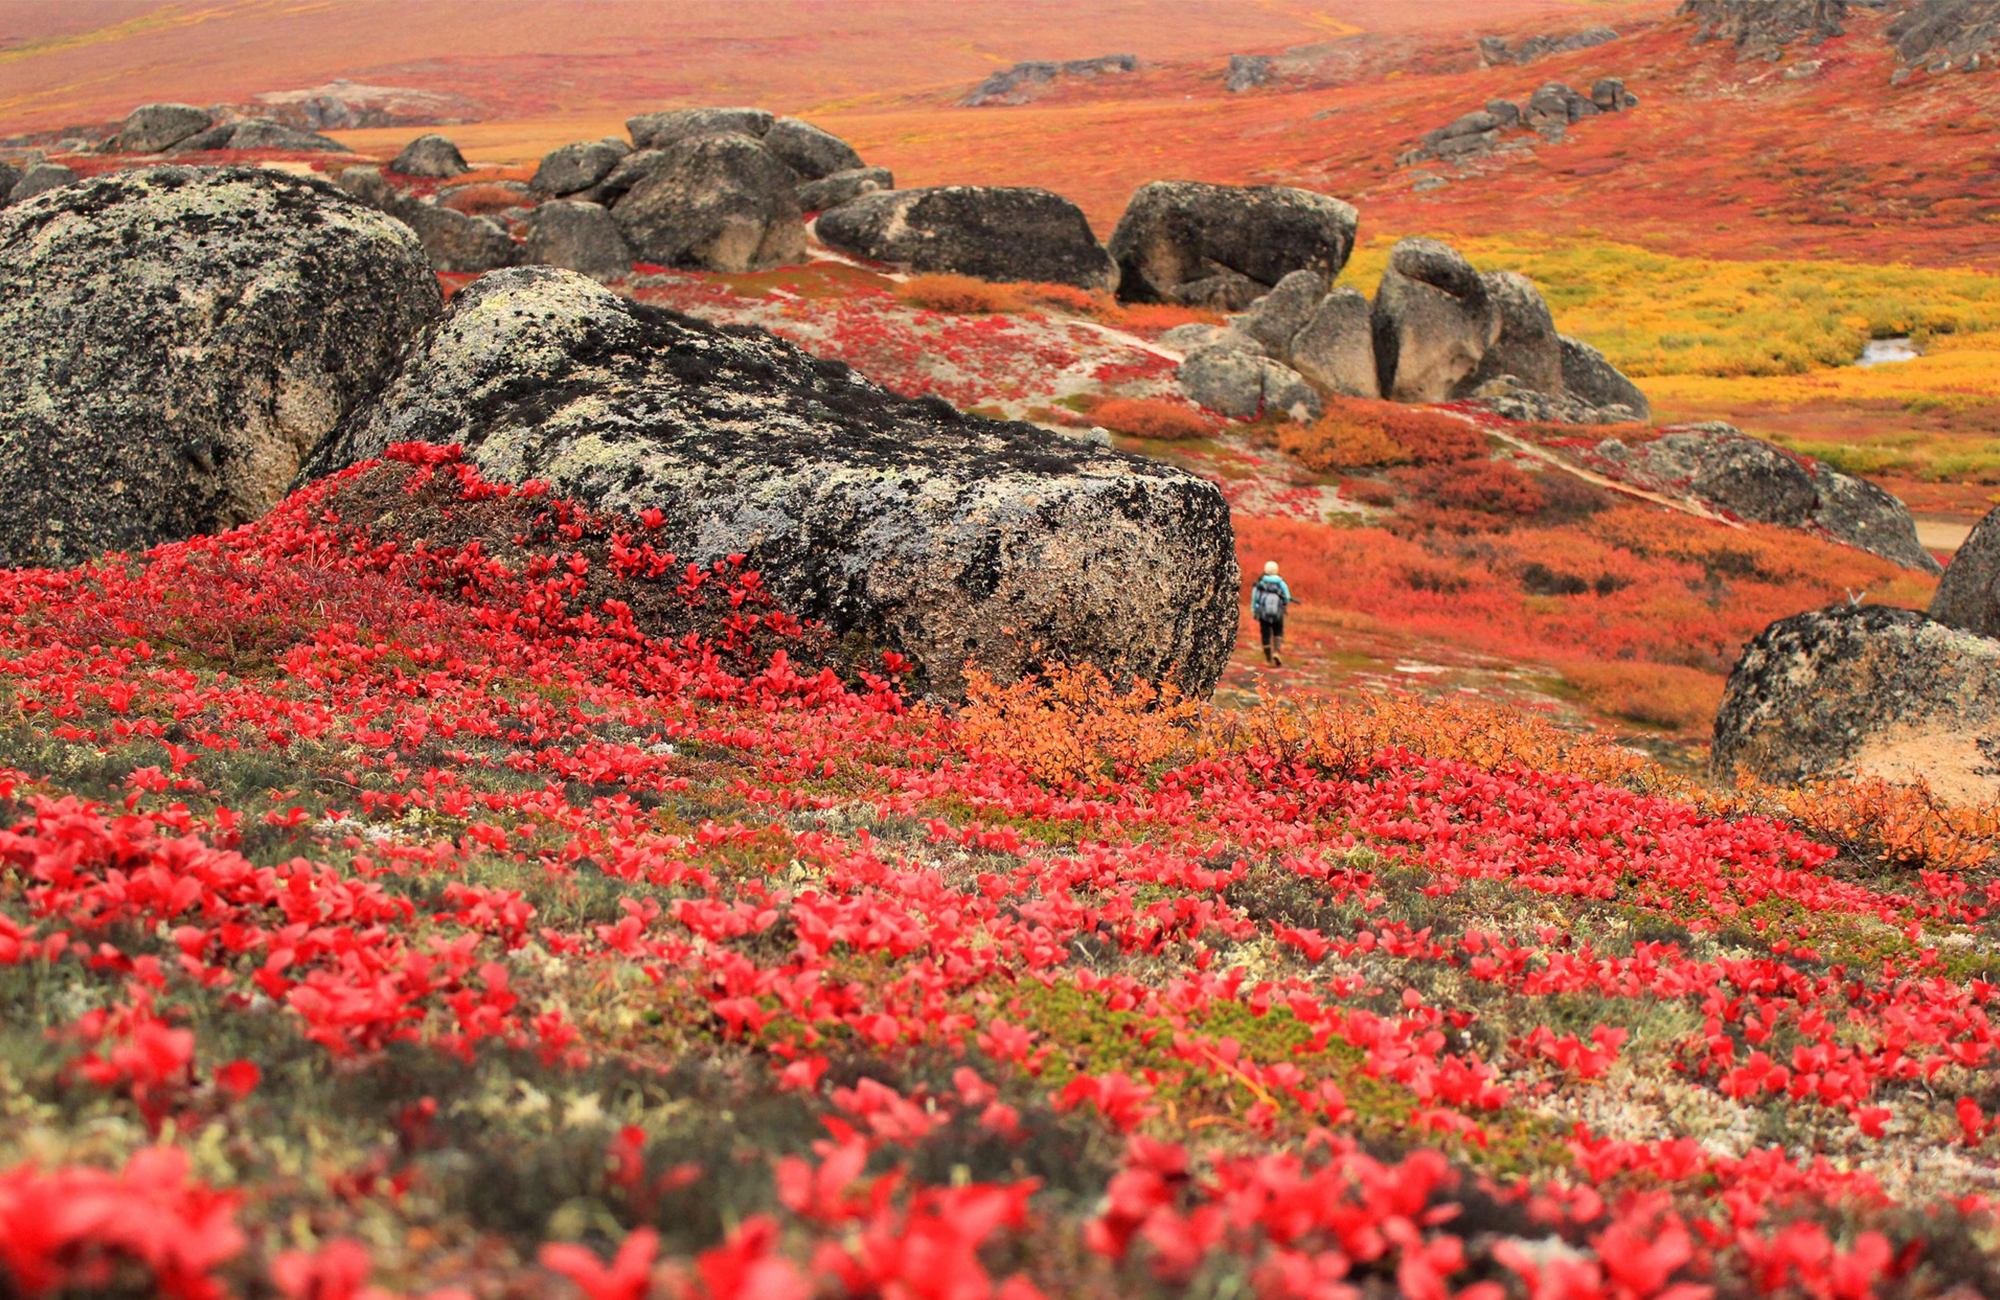 The arctic tundra’s fall foliage is as vibrant as it is short-lived